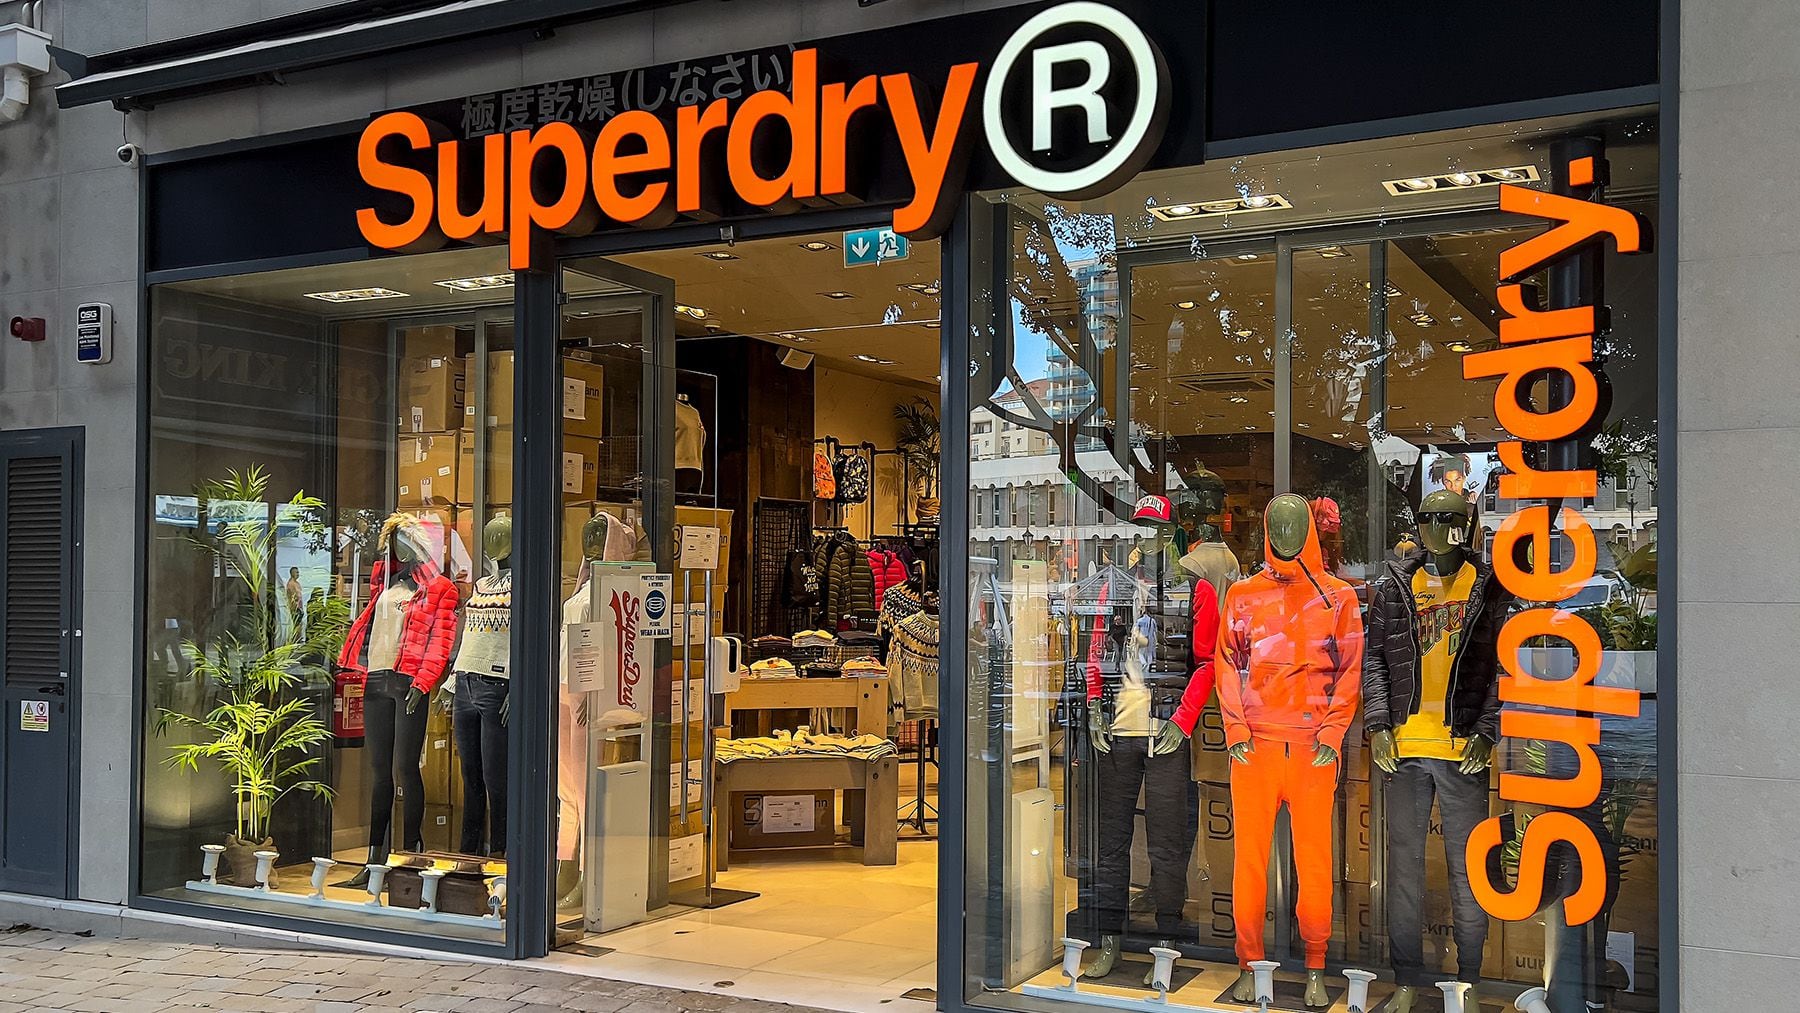 Superdry Losses Balloon as Retailer Struggles to Compete